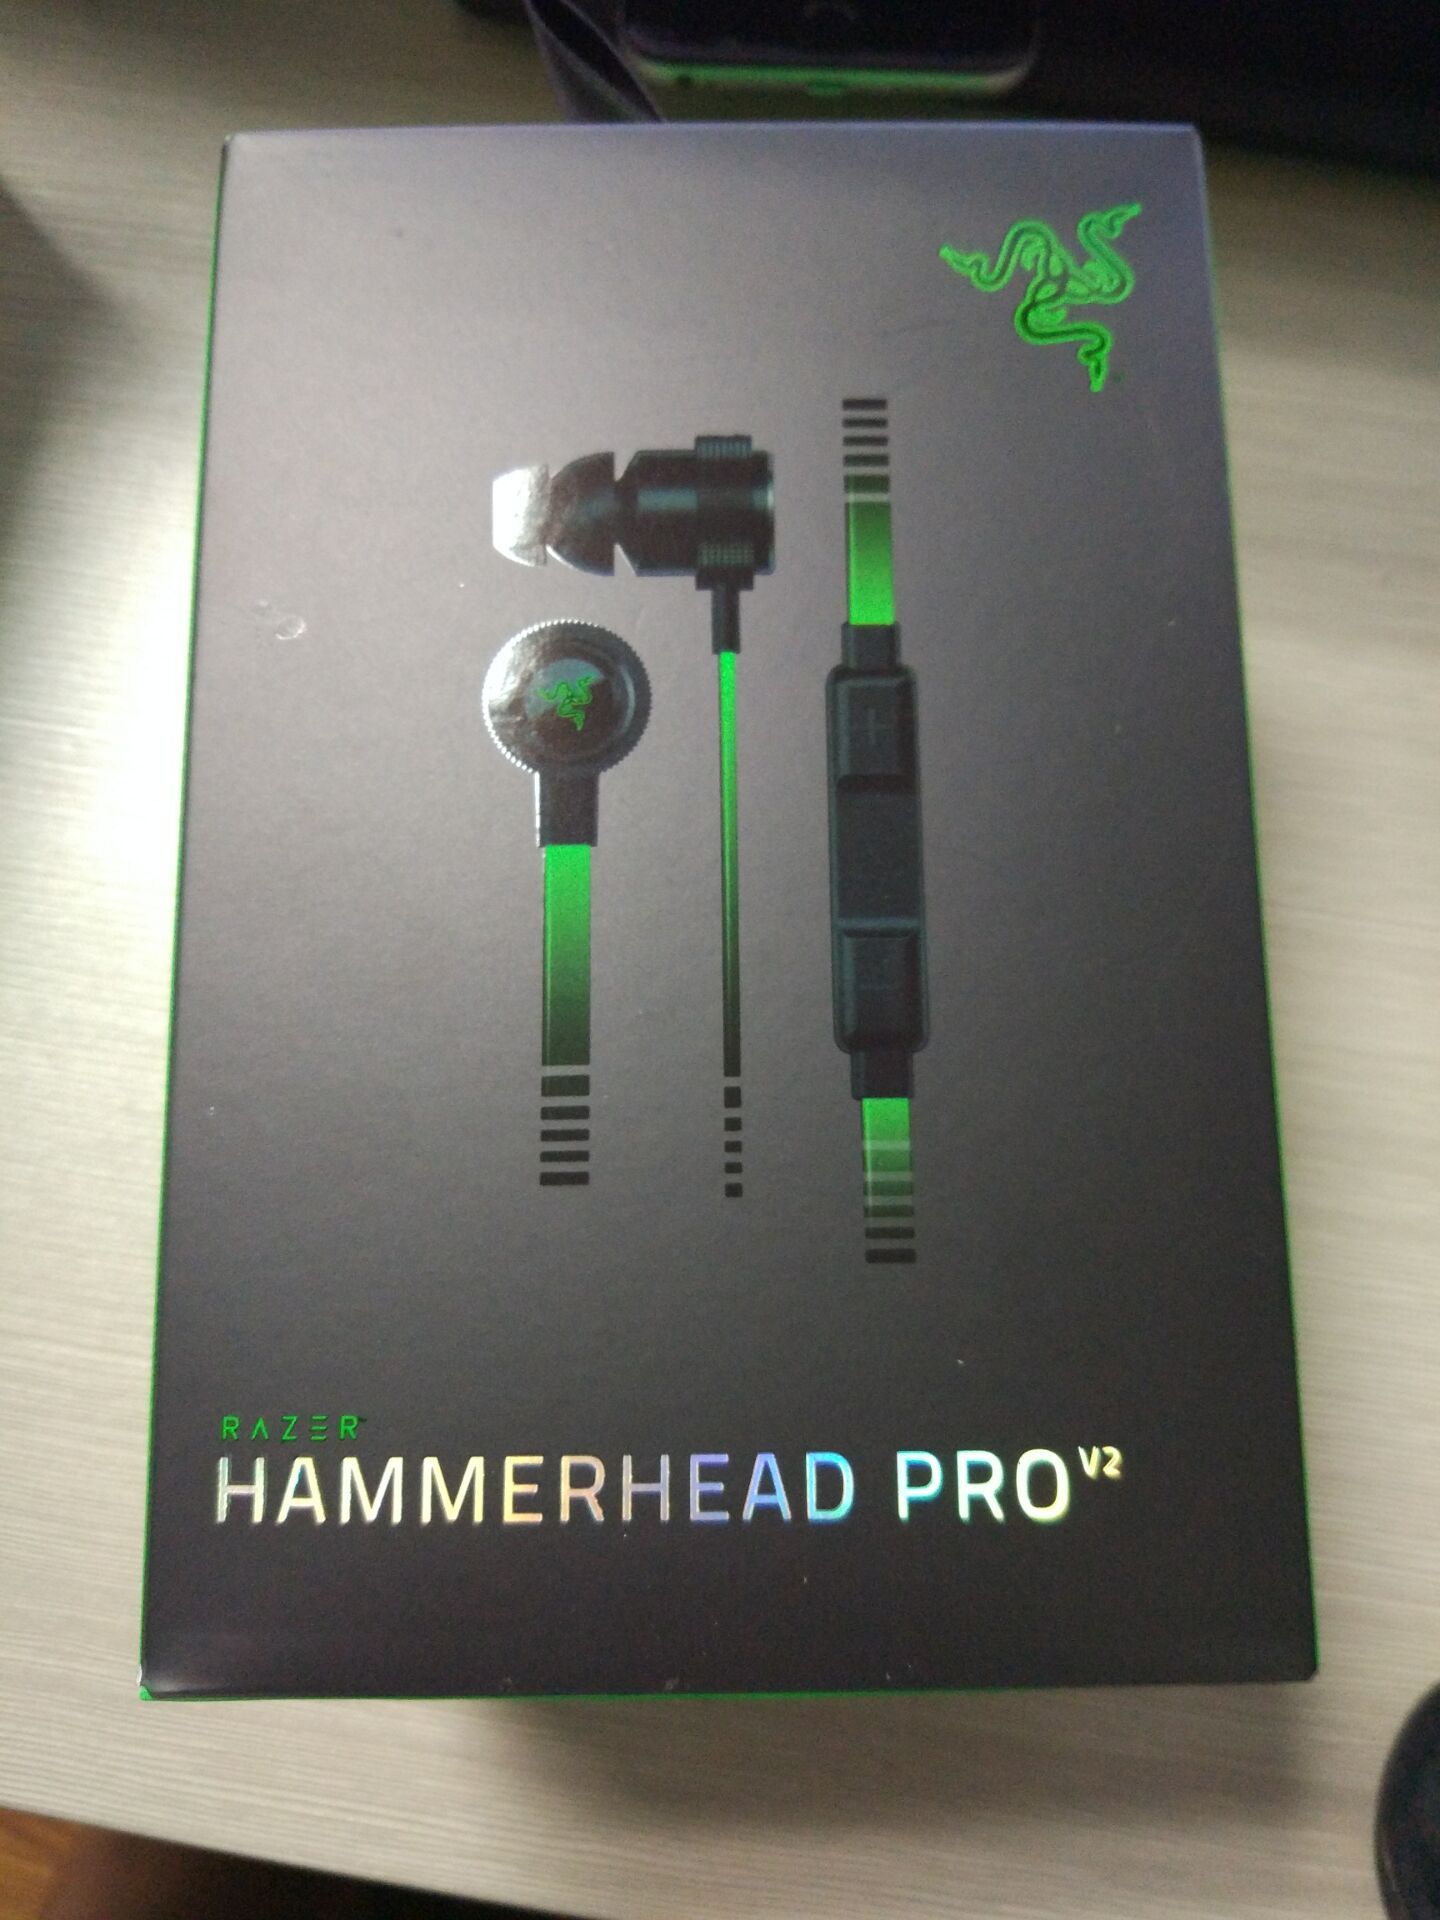 16 Hammerhead Pro V2 In Ear Earphone Headphone With Microphone Mic Retail Box Gaming Headset Best Quality Noise Isolation 3 5mm From I Power 7 29 Dhgate Com